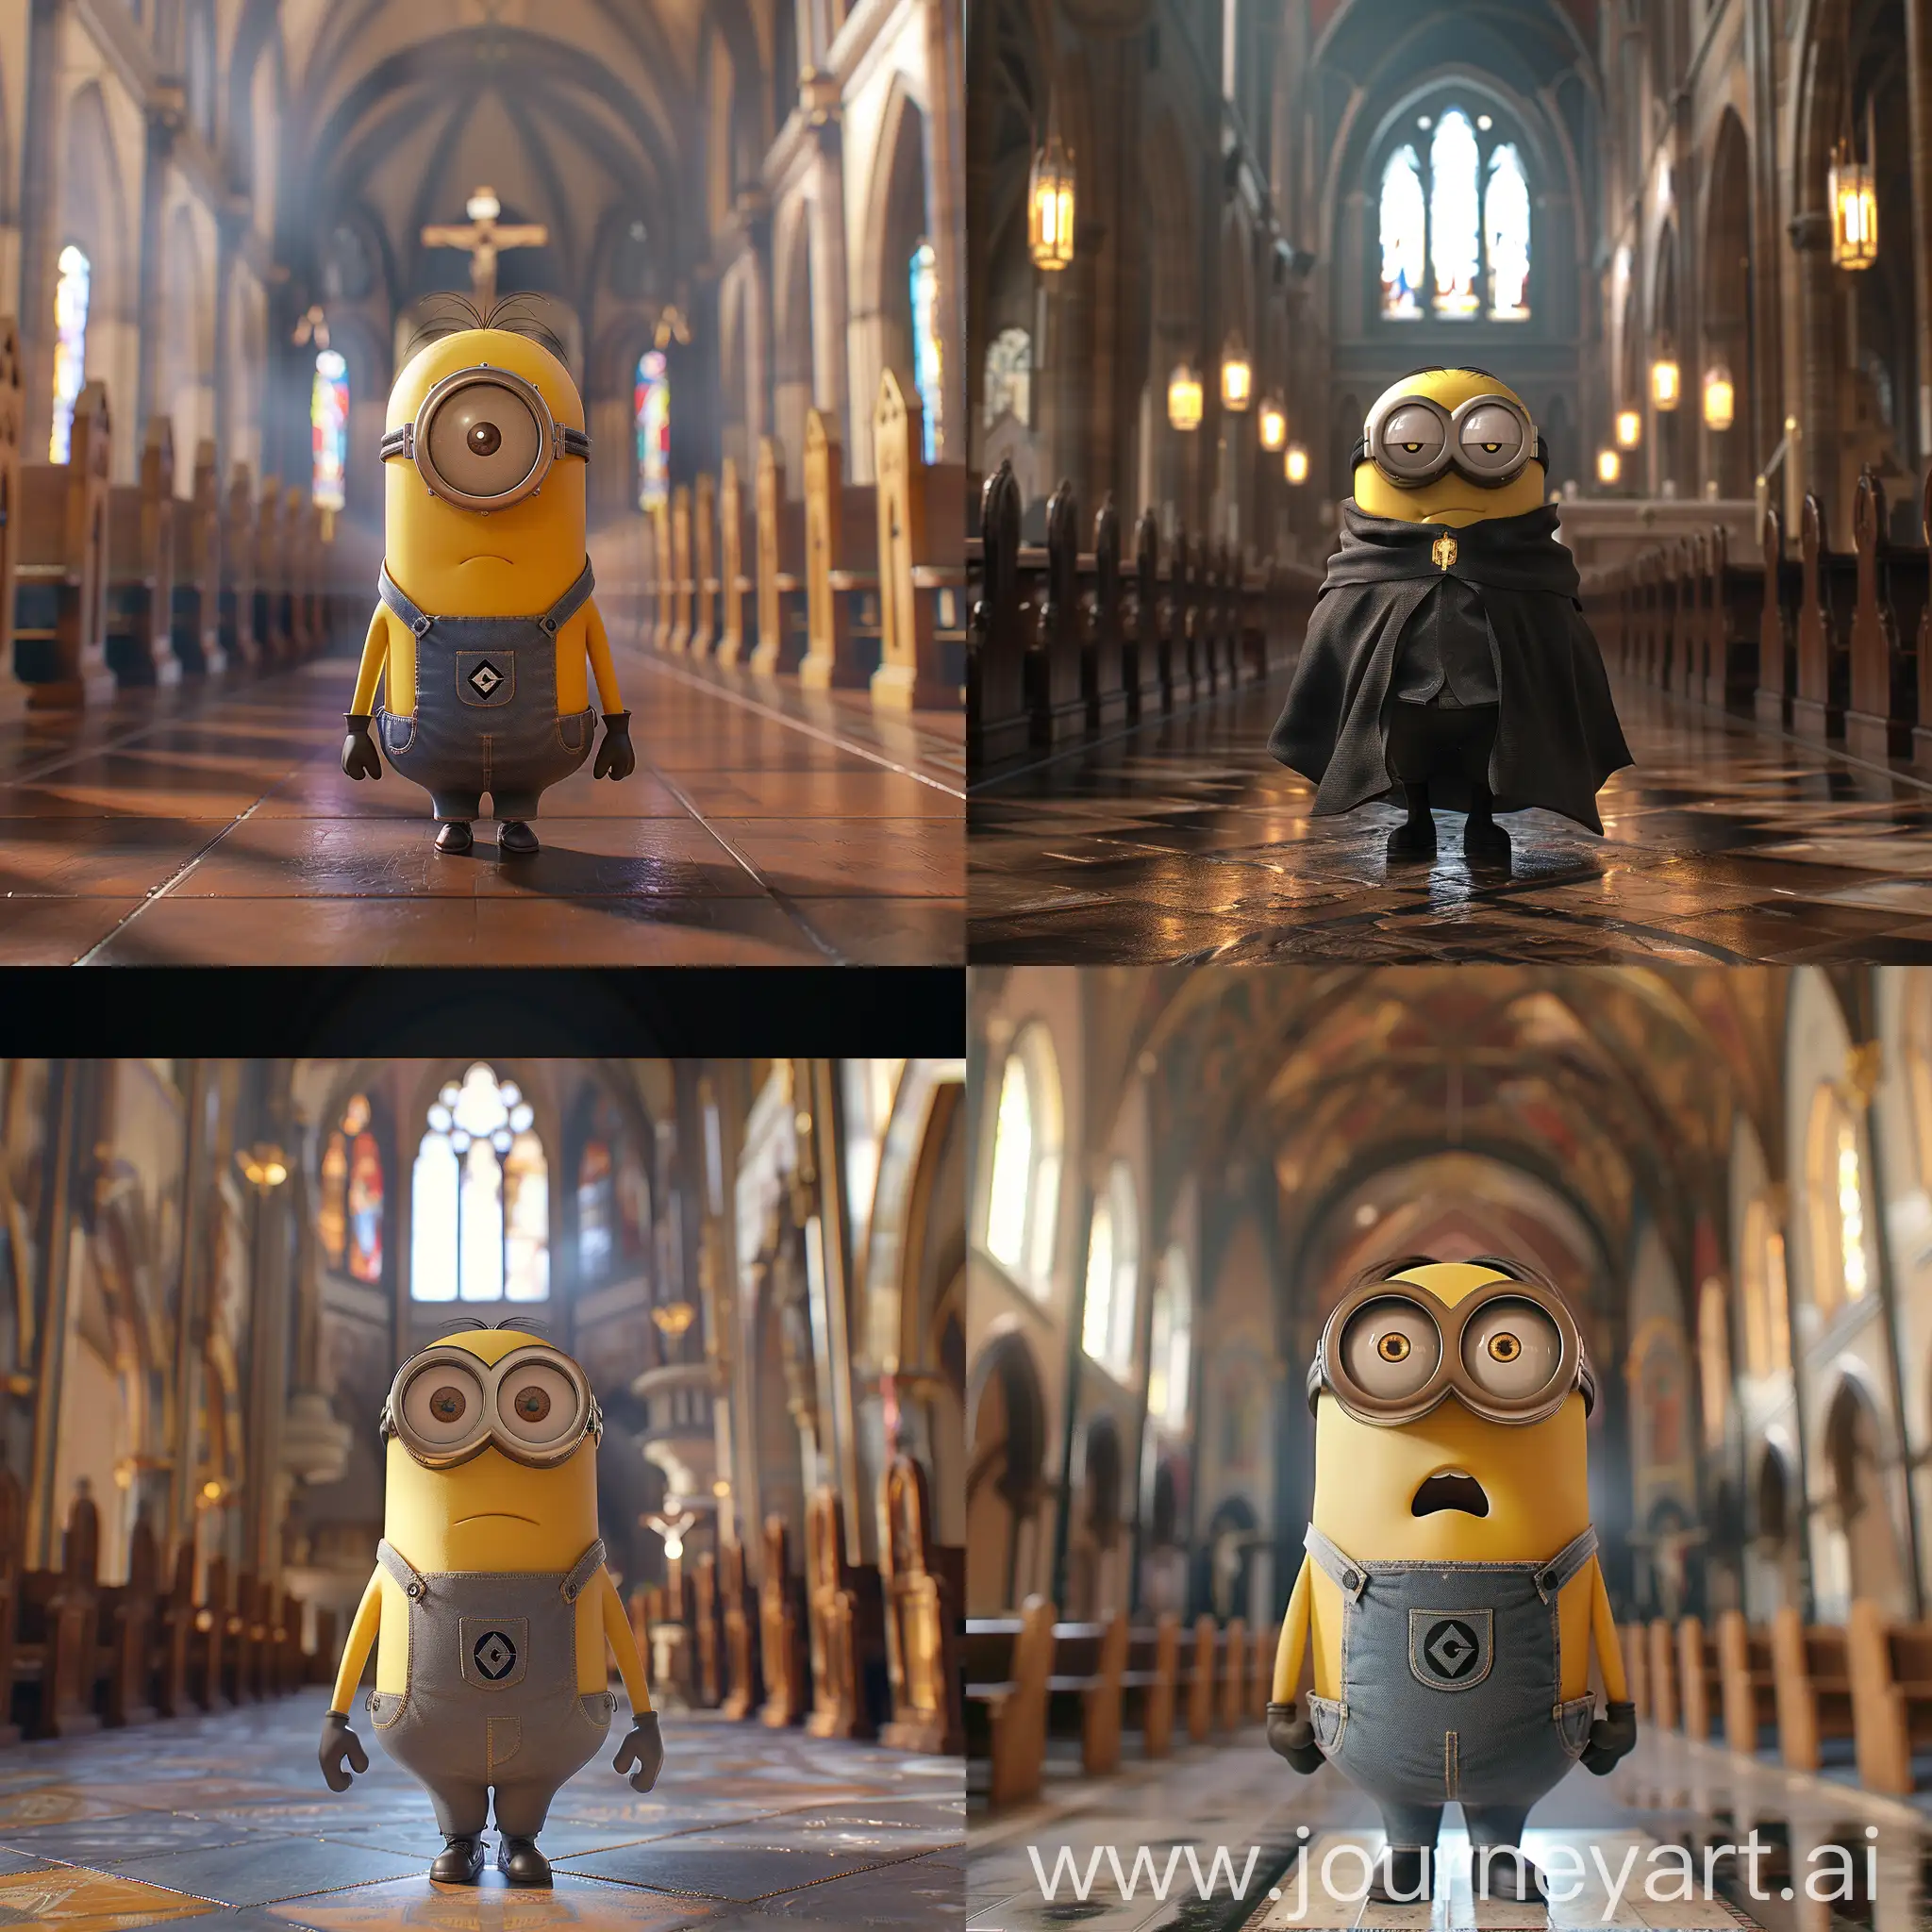 Minion-in-Church-Cathedral-Resembling-Griffith-from-Berserk-Anime